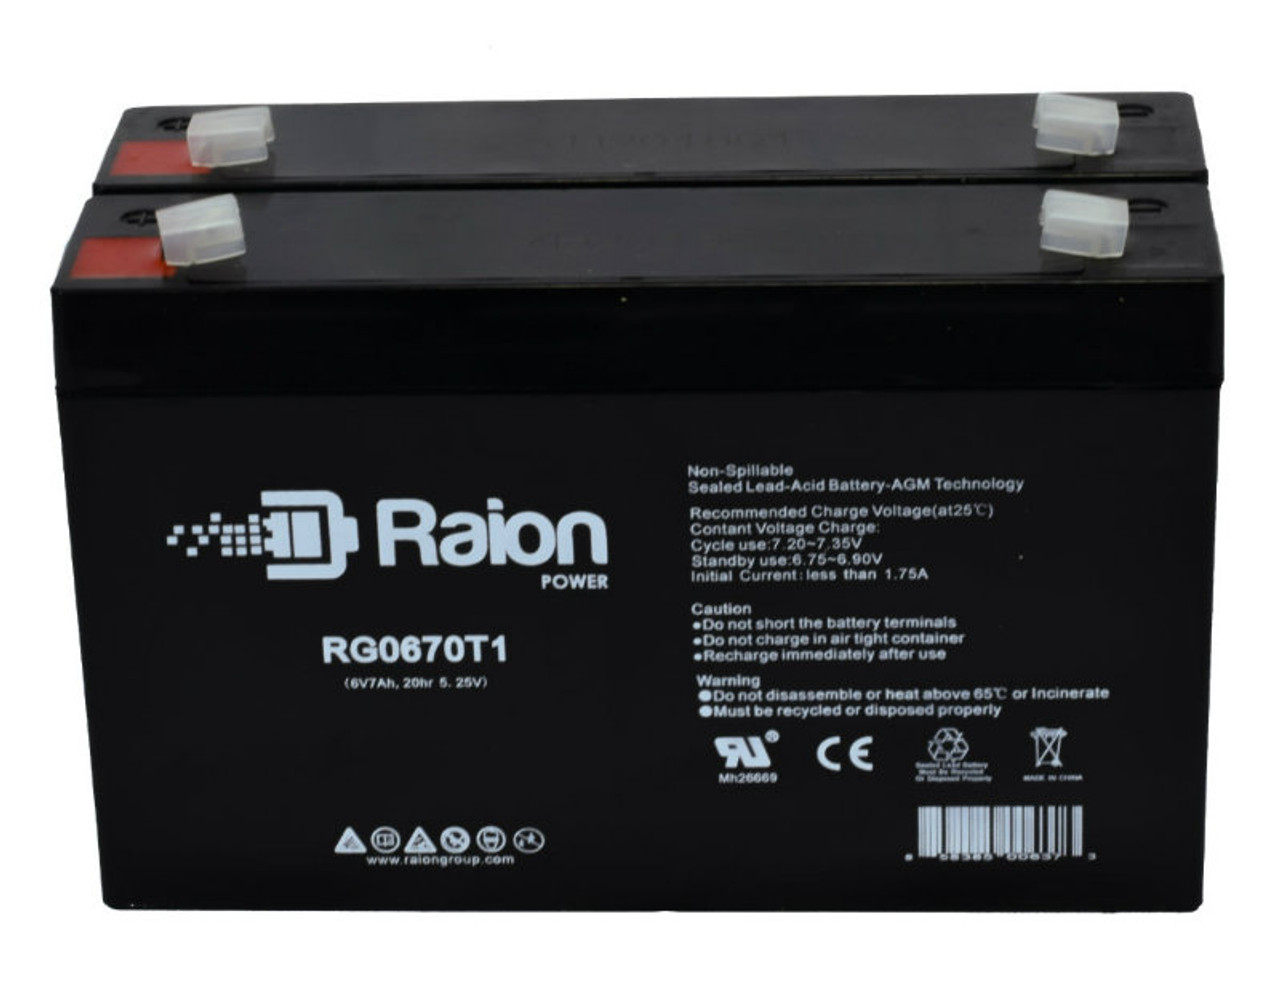 Raion Power RG0670T1 6V 7Ah Replacement Emergency Light Battery for Dual Lite 12-826 - 2 Pack